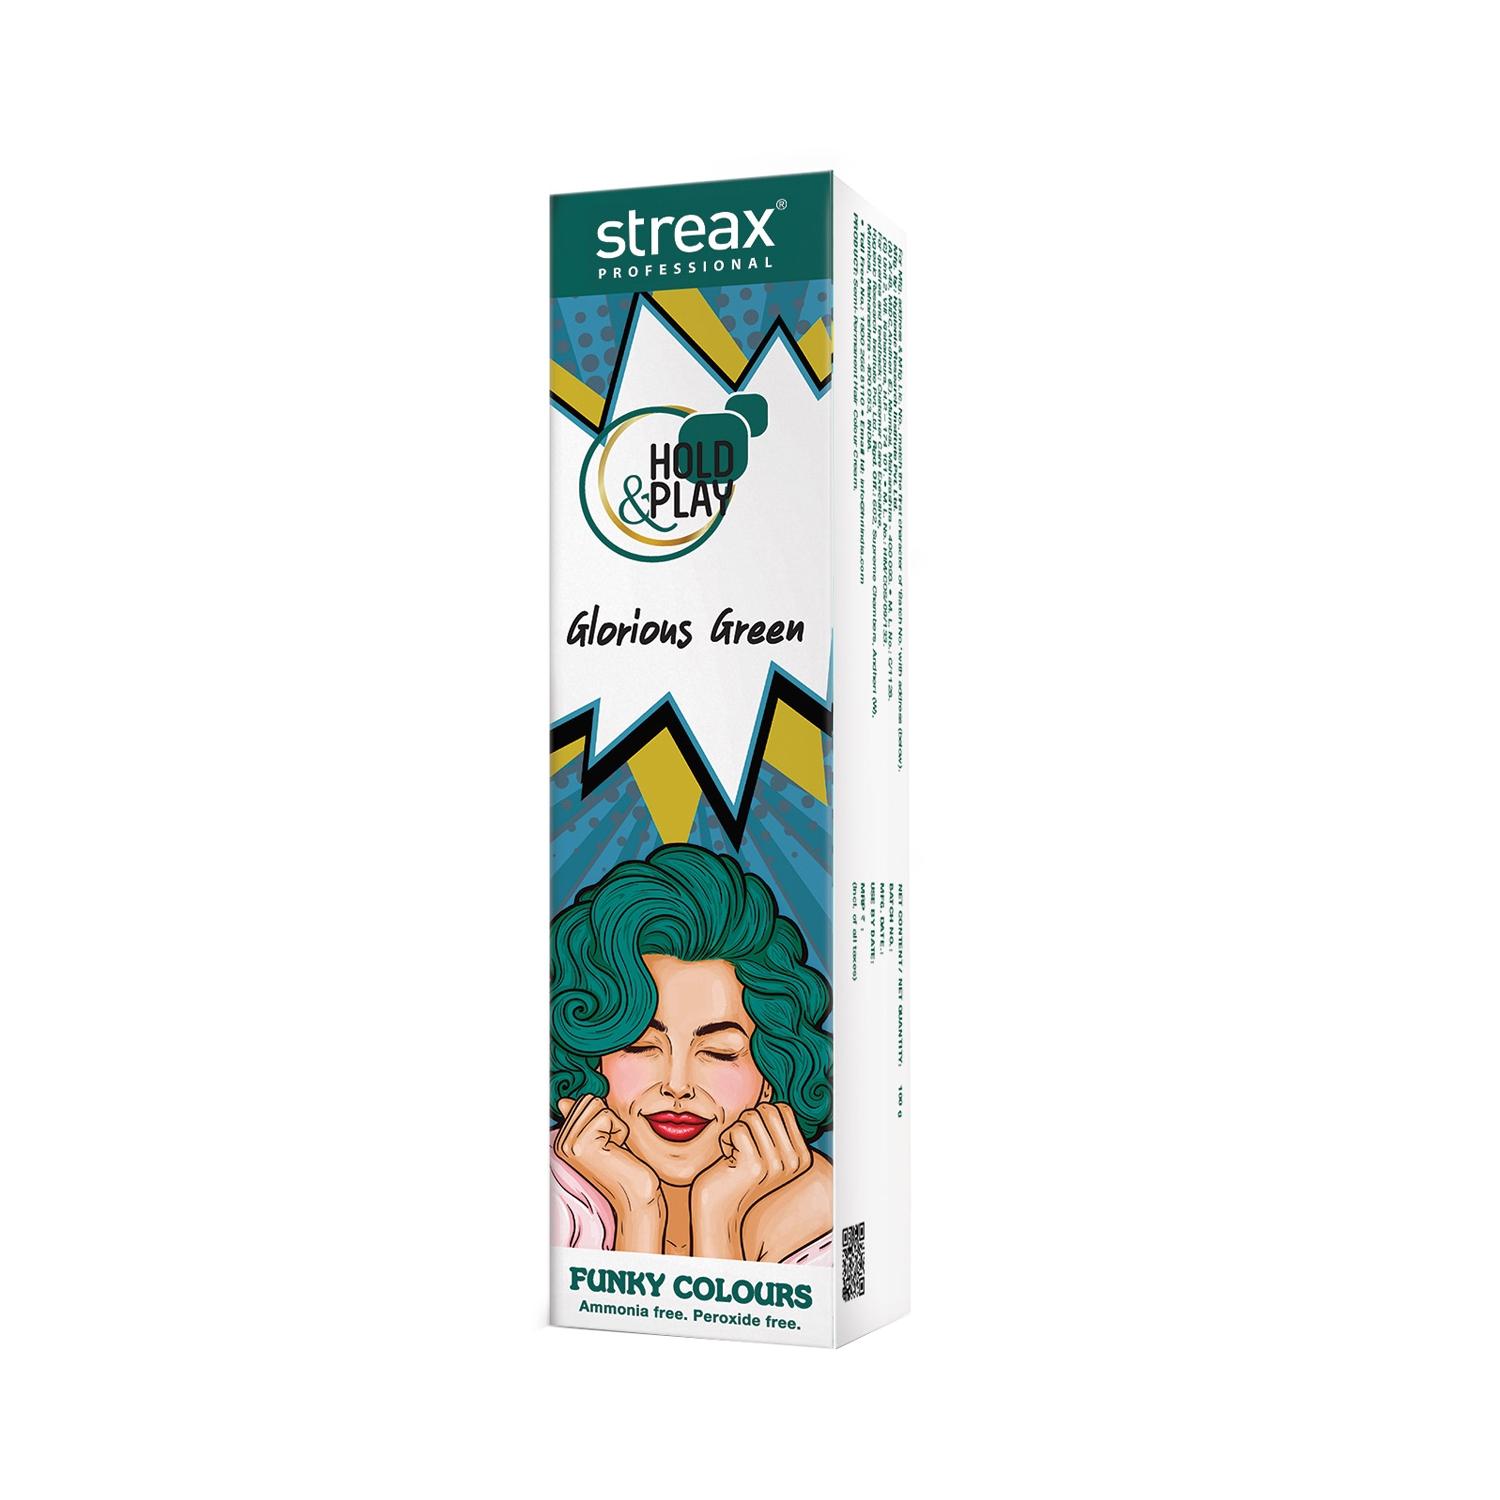 streax professional hold & play funky hair color - glorious green (100g)